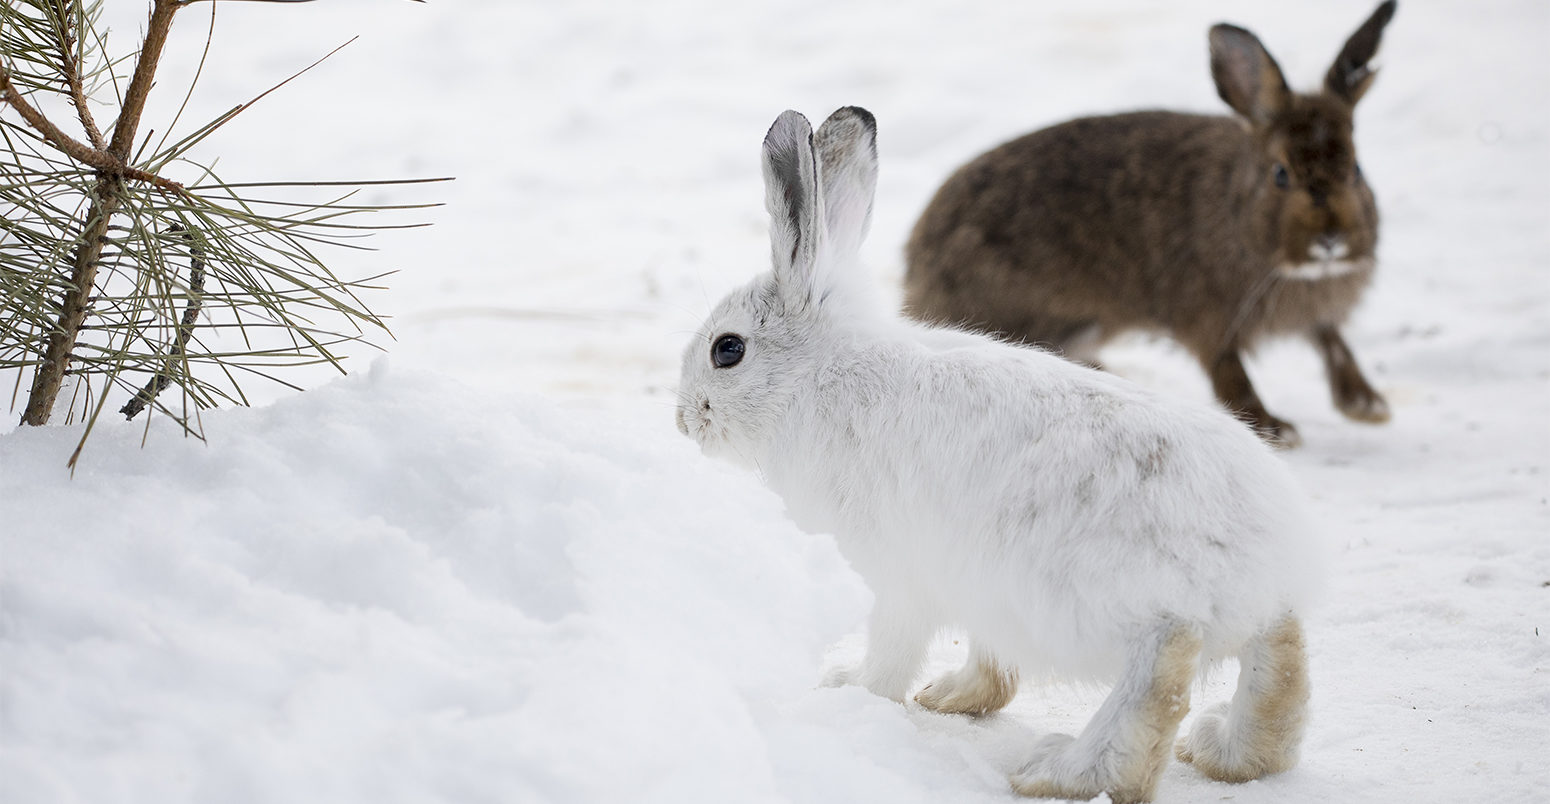 Animals with white winter camouflage could struggle to adapt to